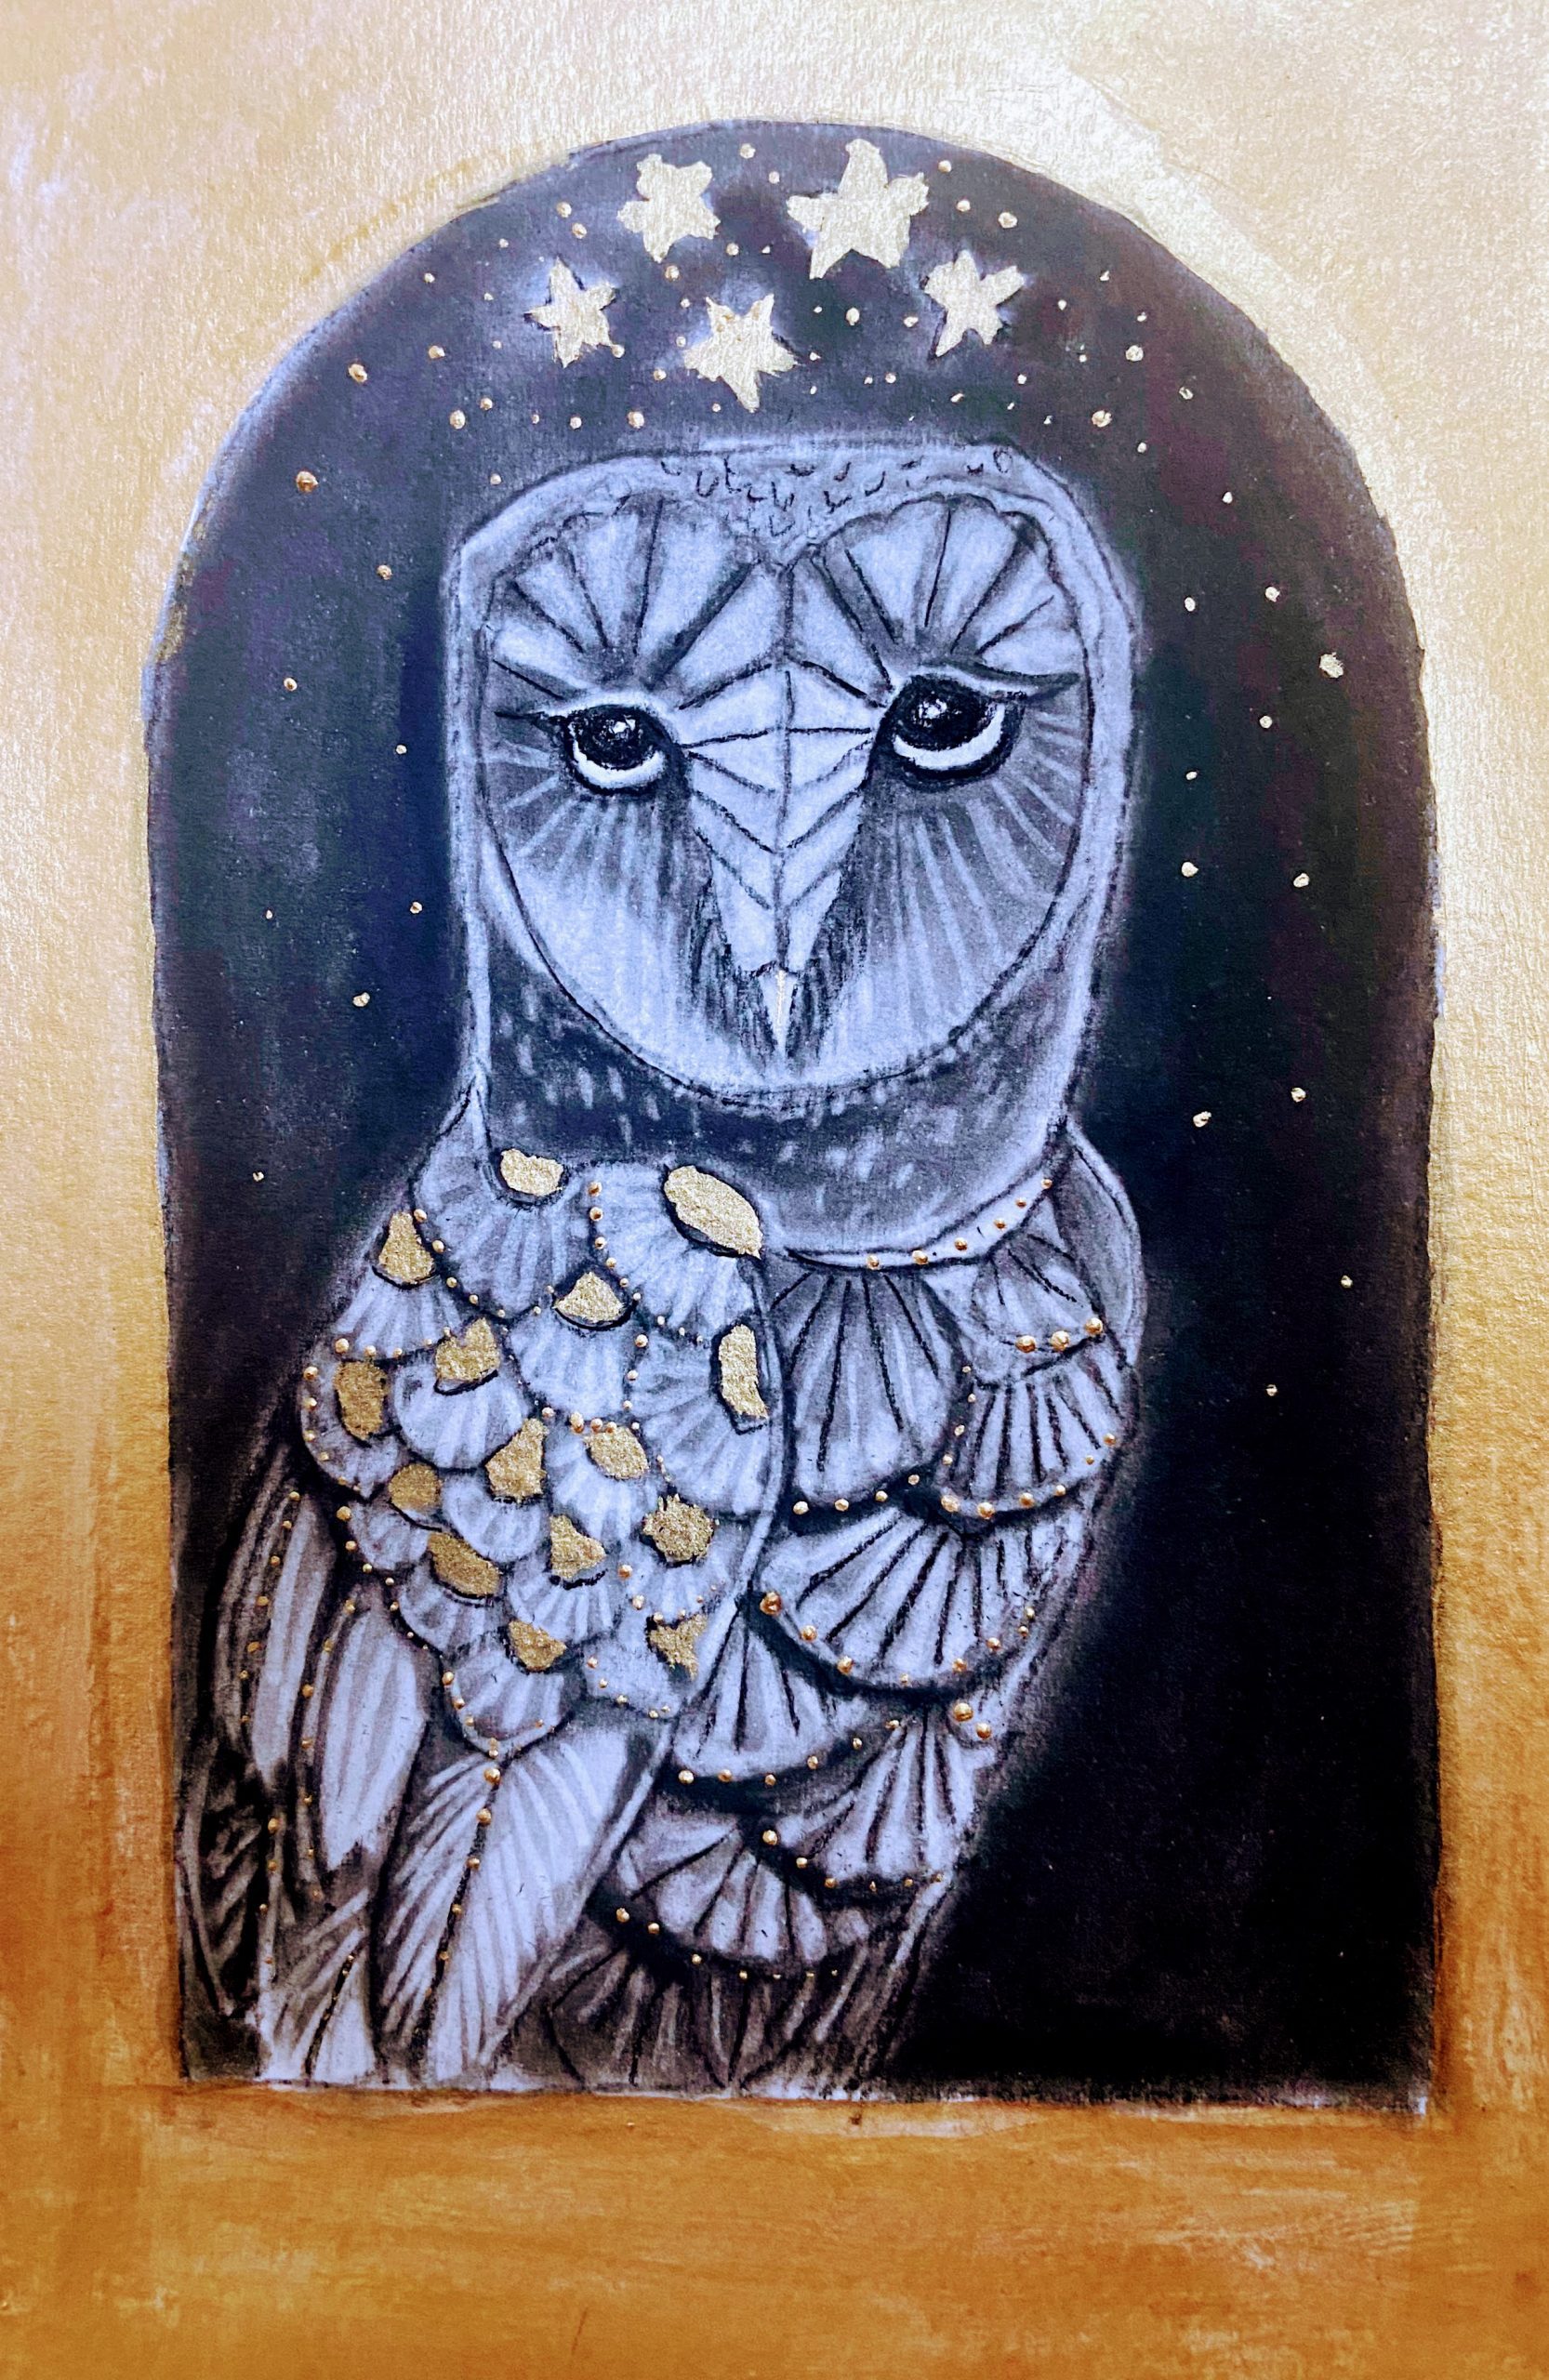 Mixed Media Owl Painting with charcoal, pan pastel, and acrylic paint